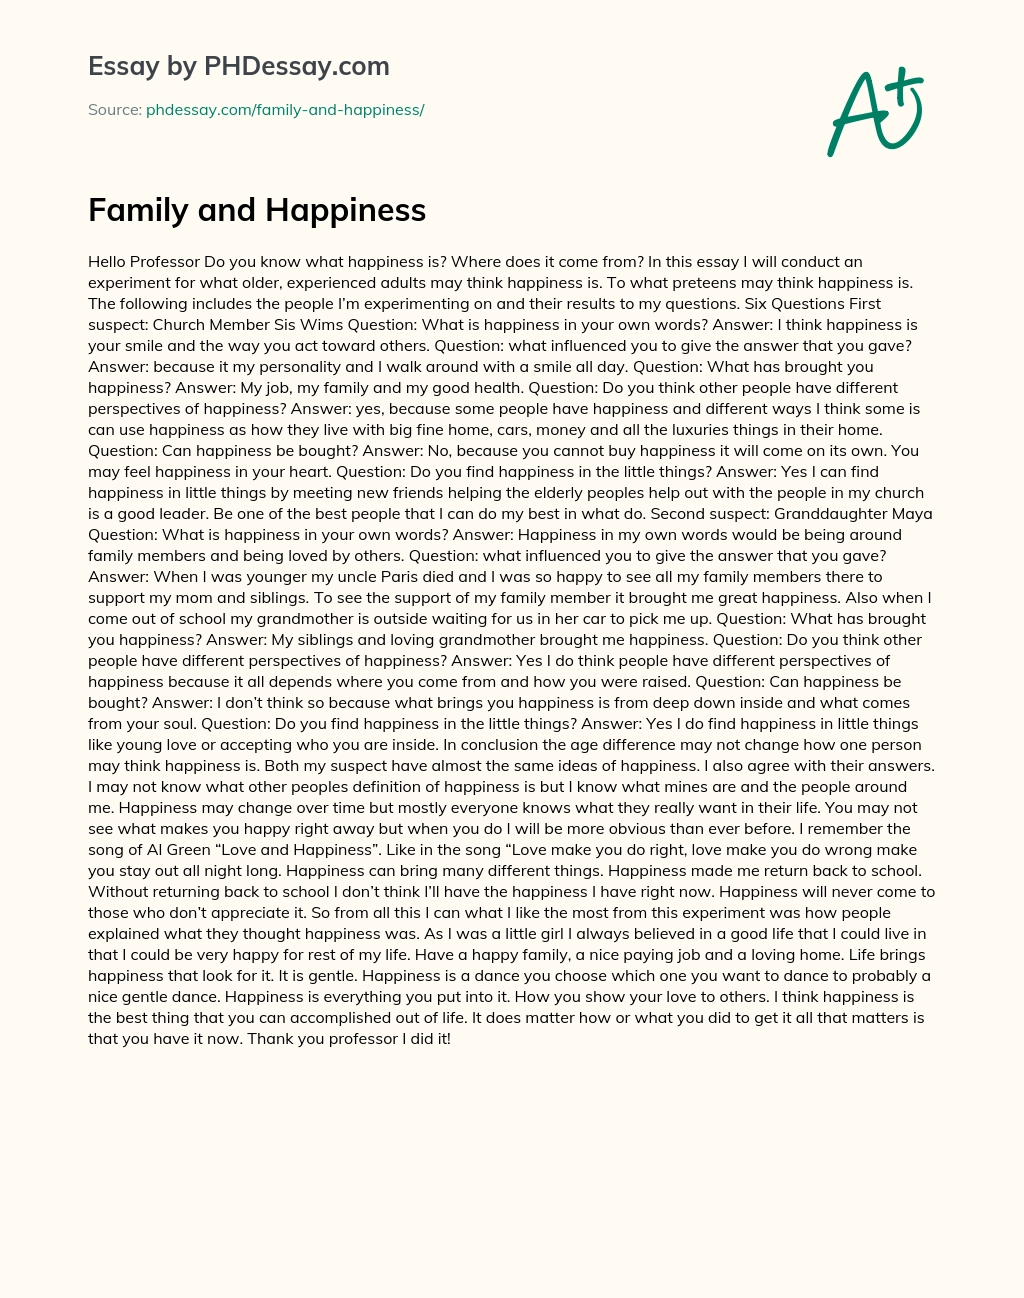 Family and Happiness essay